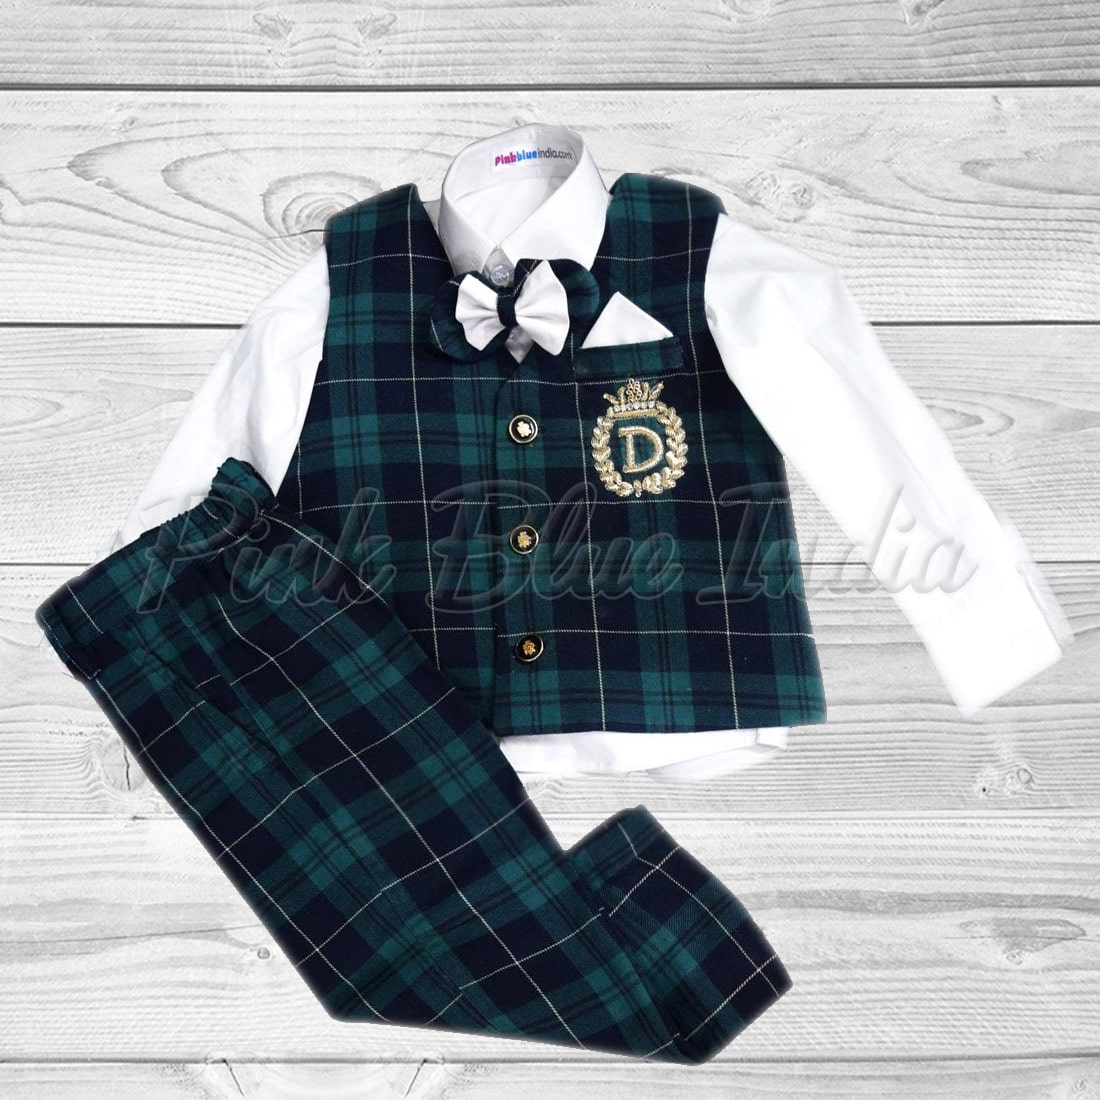 Baby Boy Gentleman Outfit Suit - personalised birthday outfit